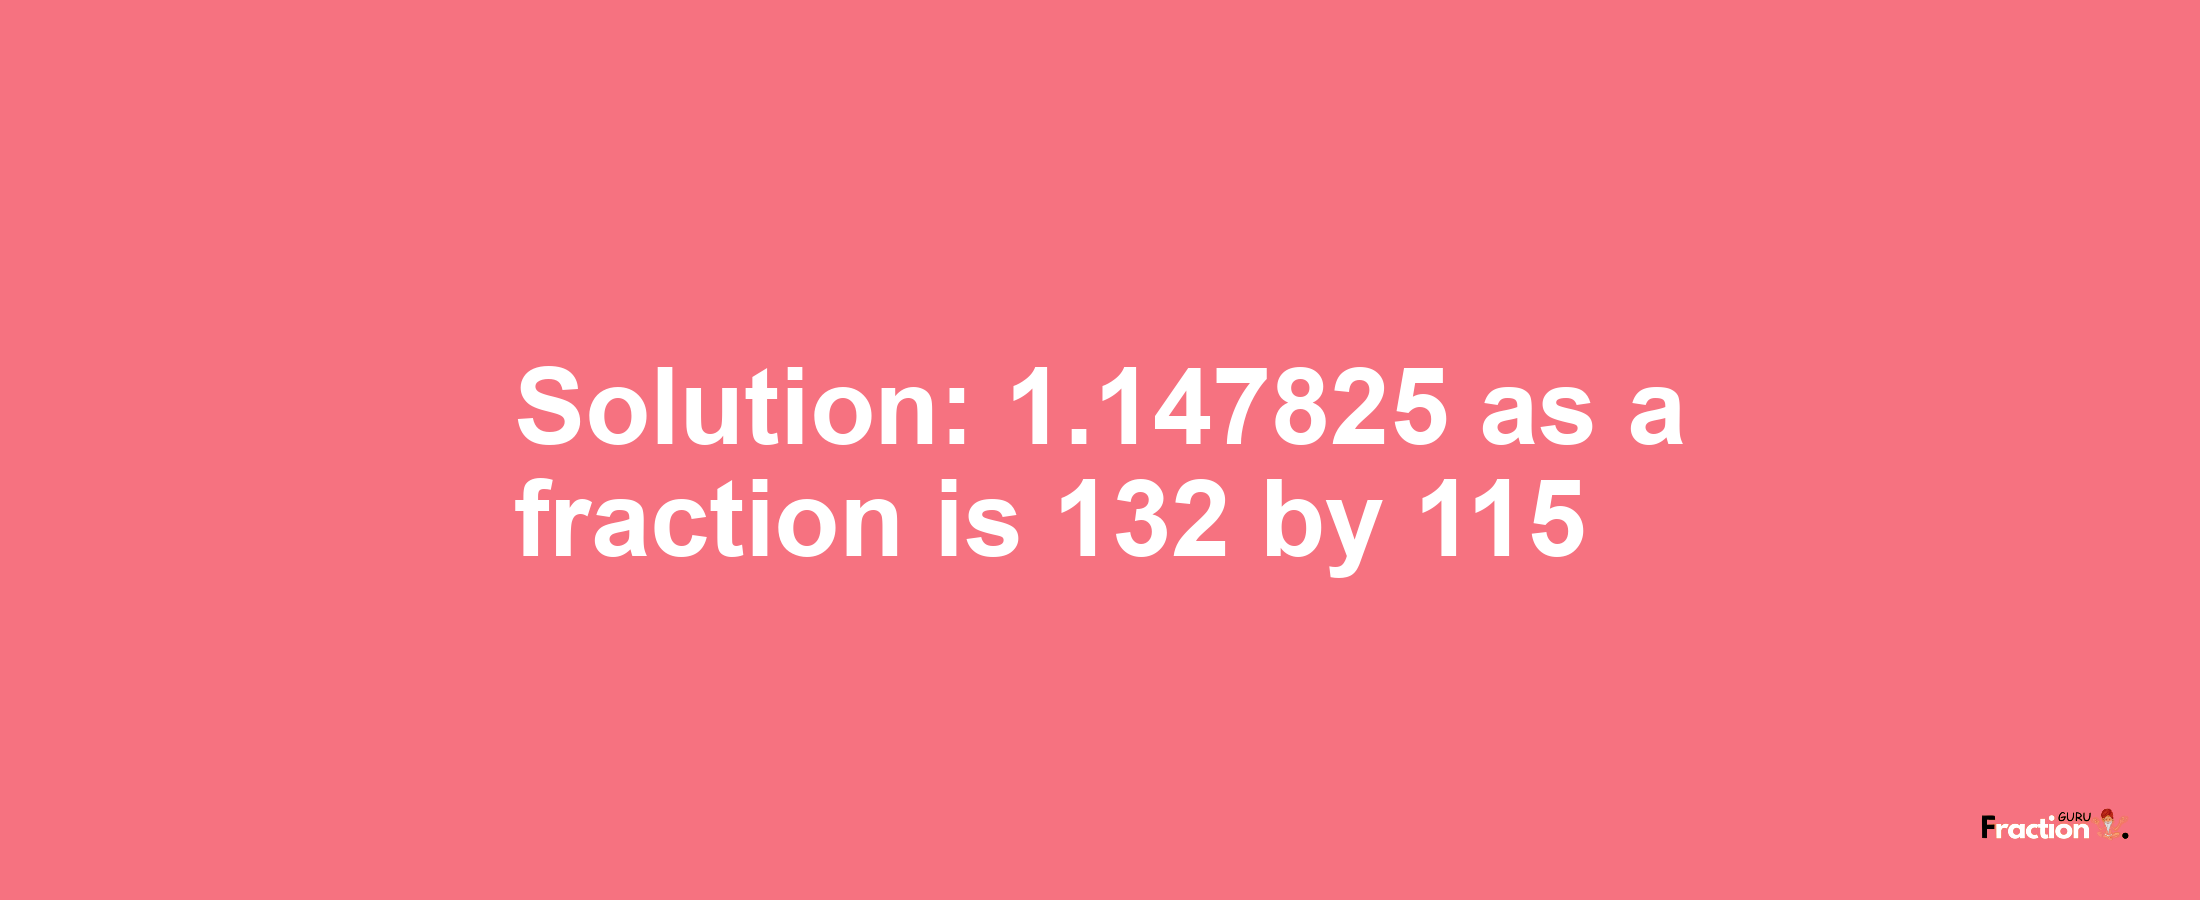 Solution:1.147825 as a fraction is 132/115